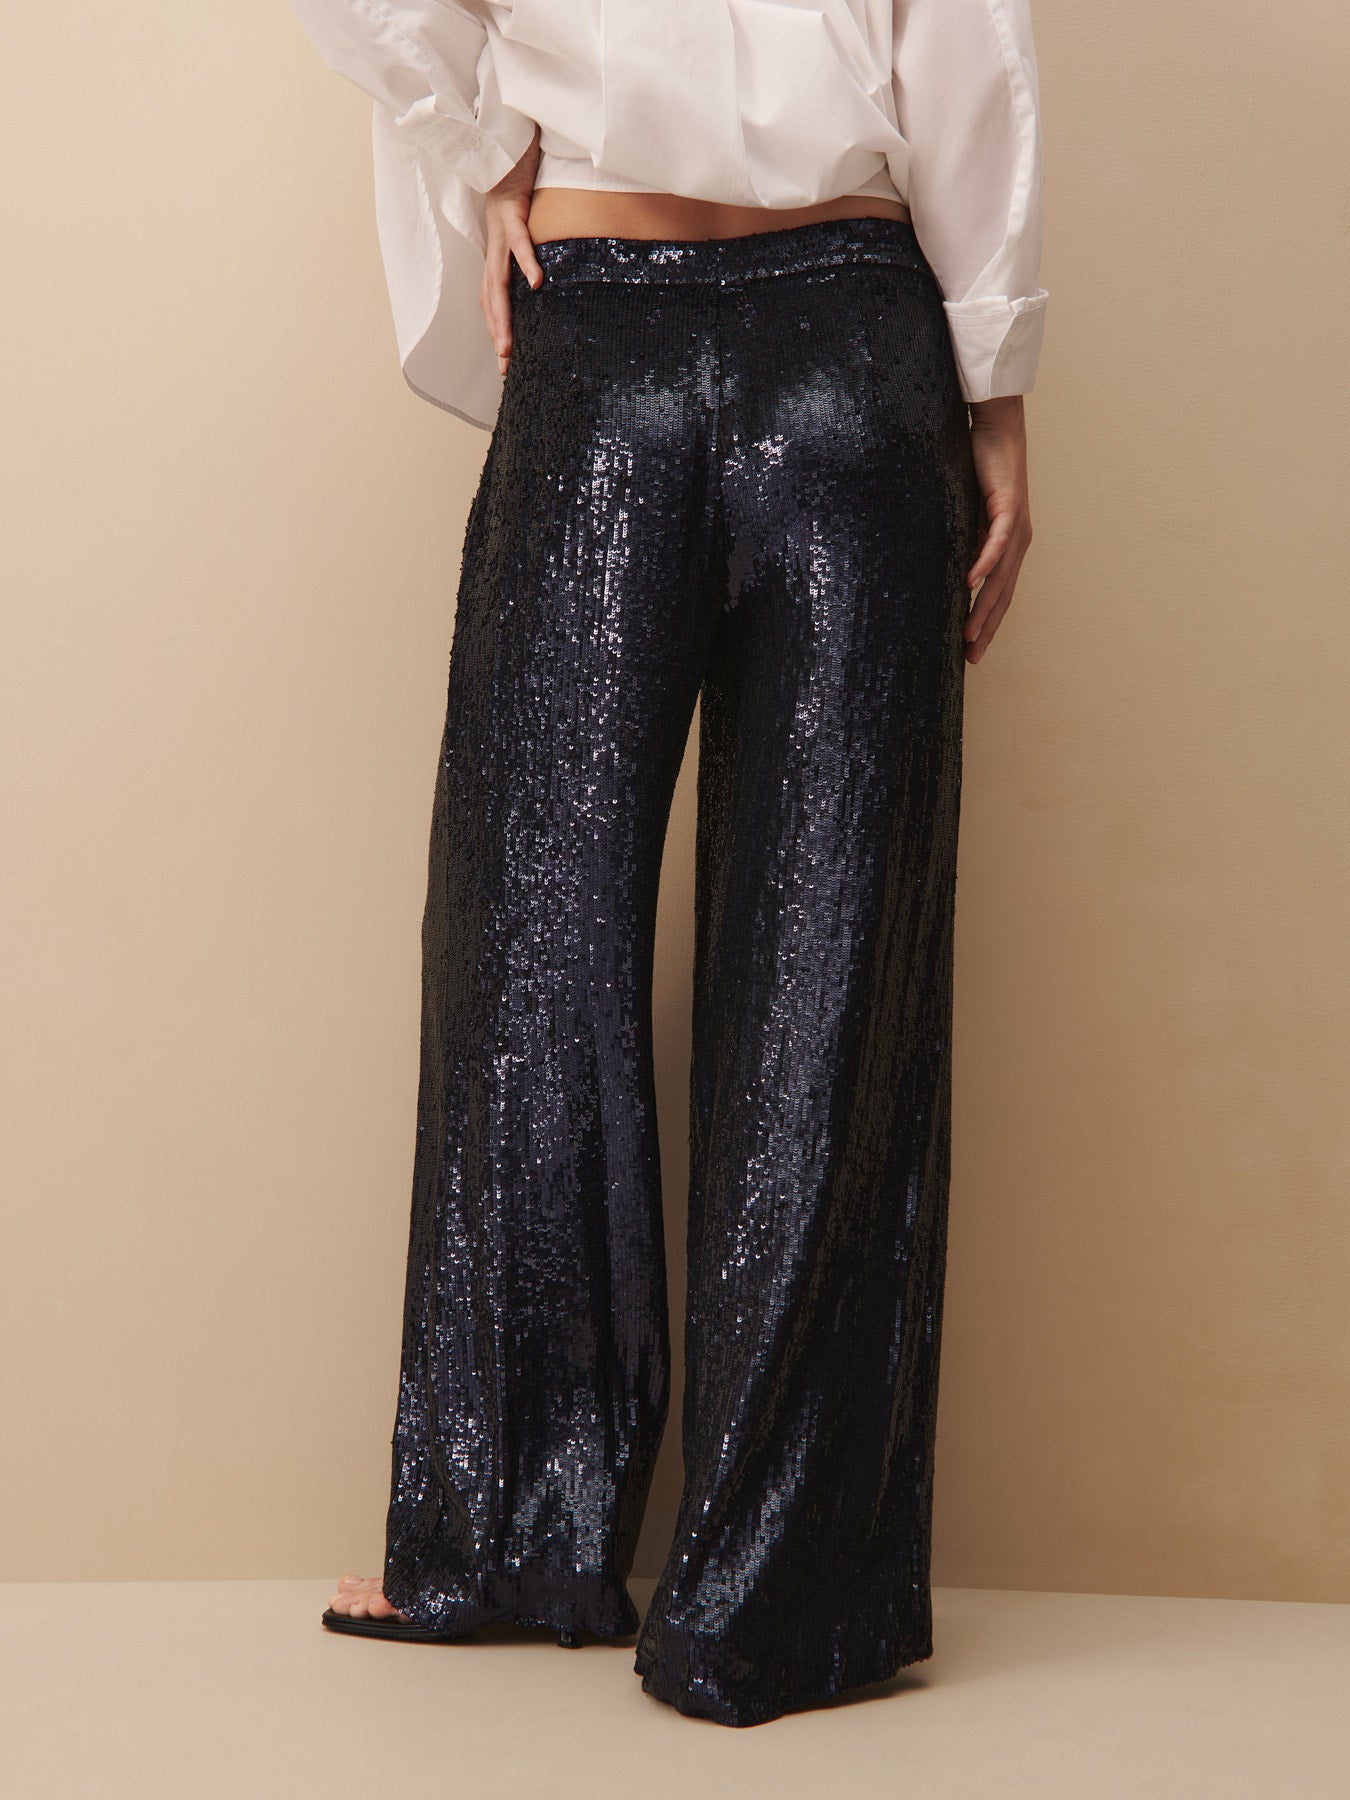 TWP Midnight Adieu Pant in Sequins view 3